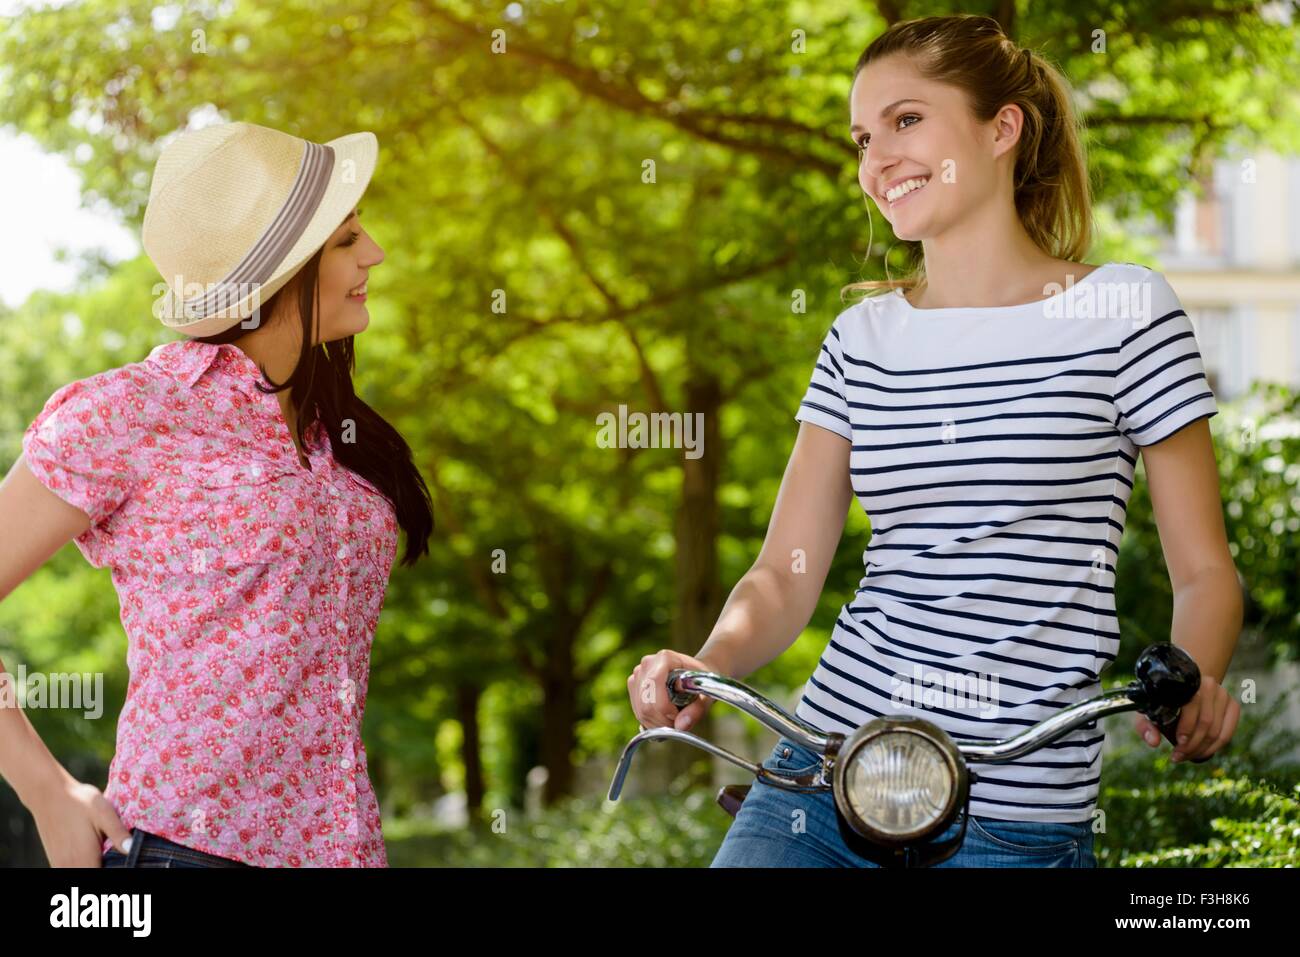 Young woman on bicycle talking to young woman wearing panama hat Stock Photo